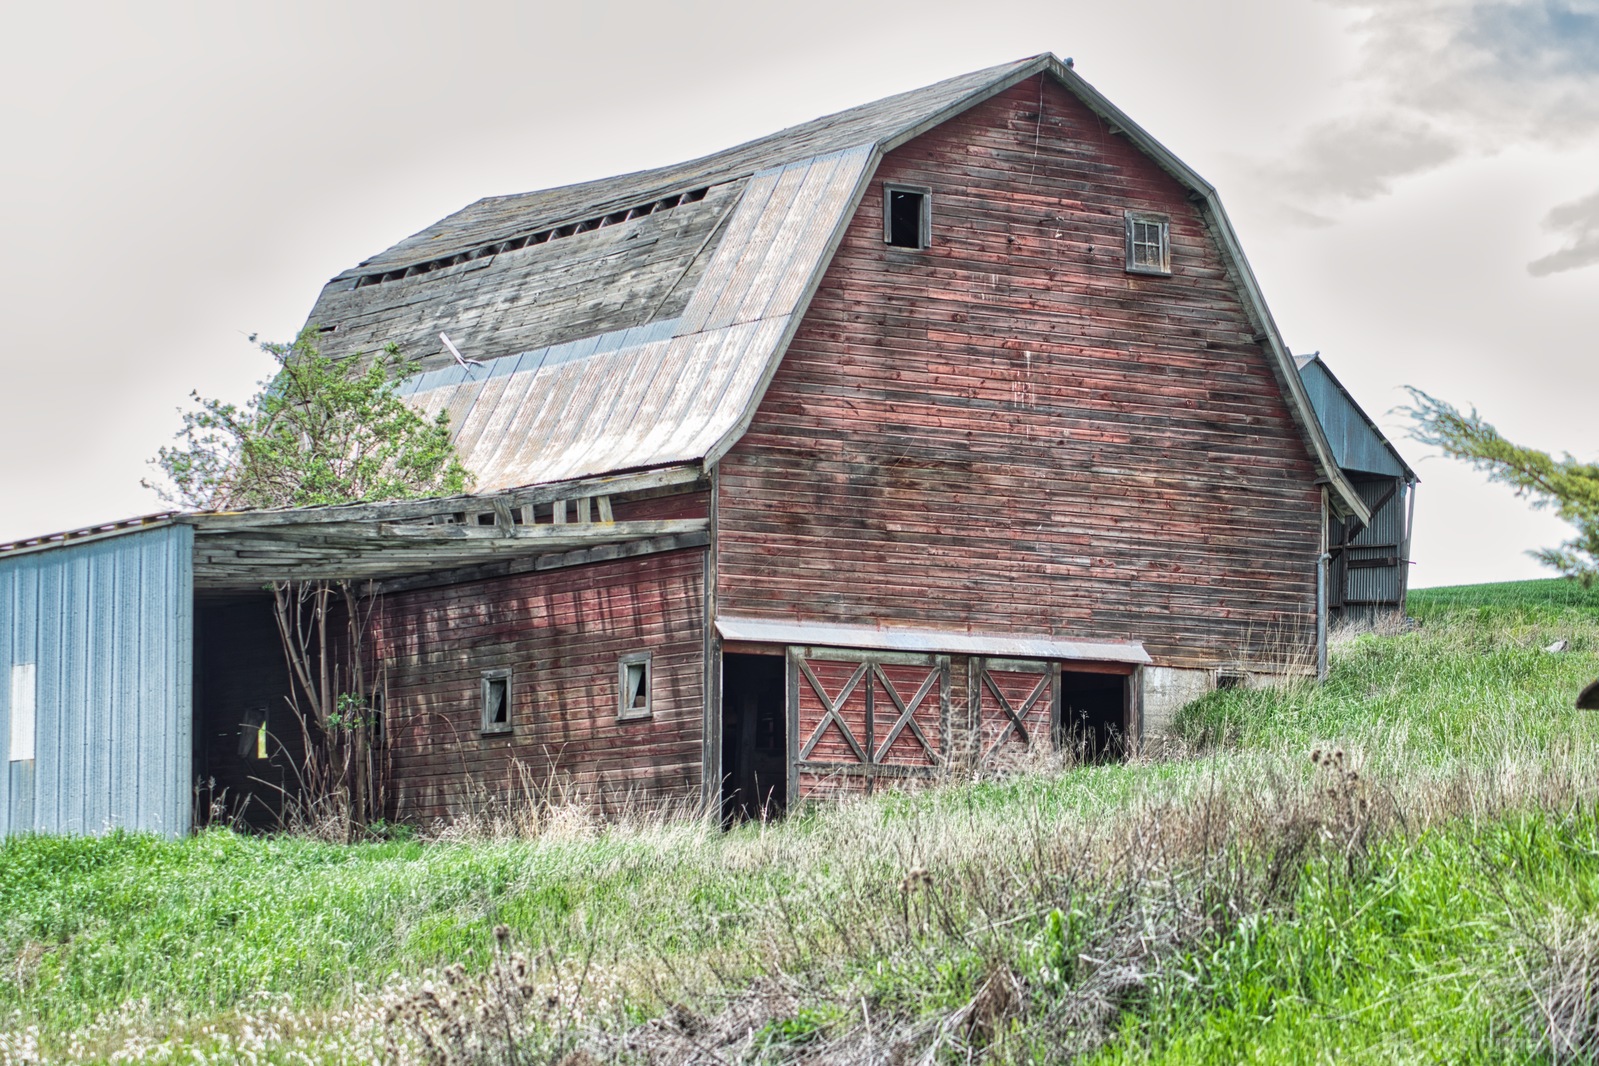 Image of Roberts Road Old Red Barn by Steve West